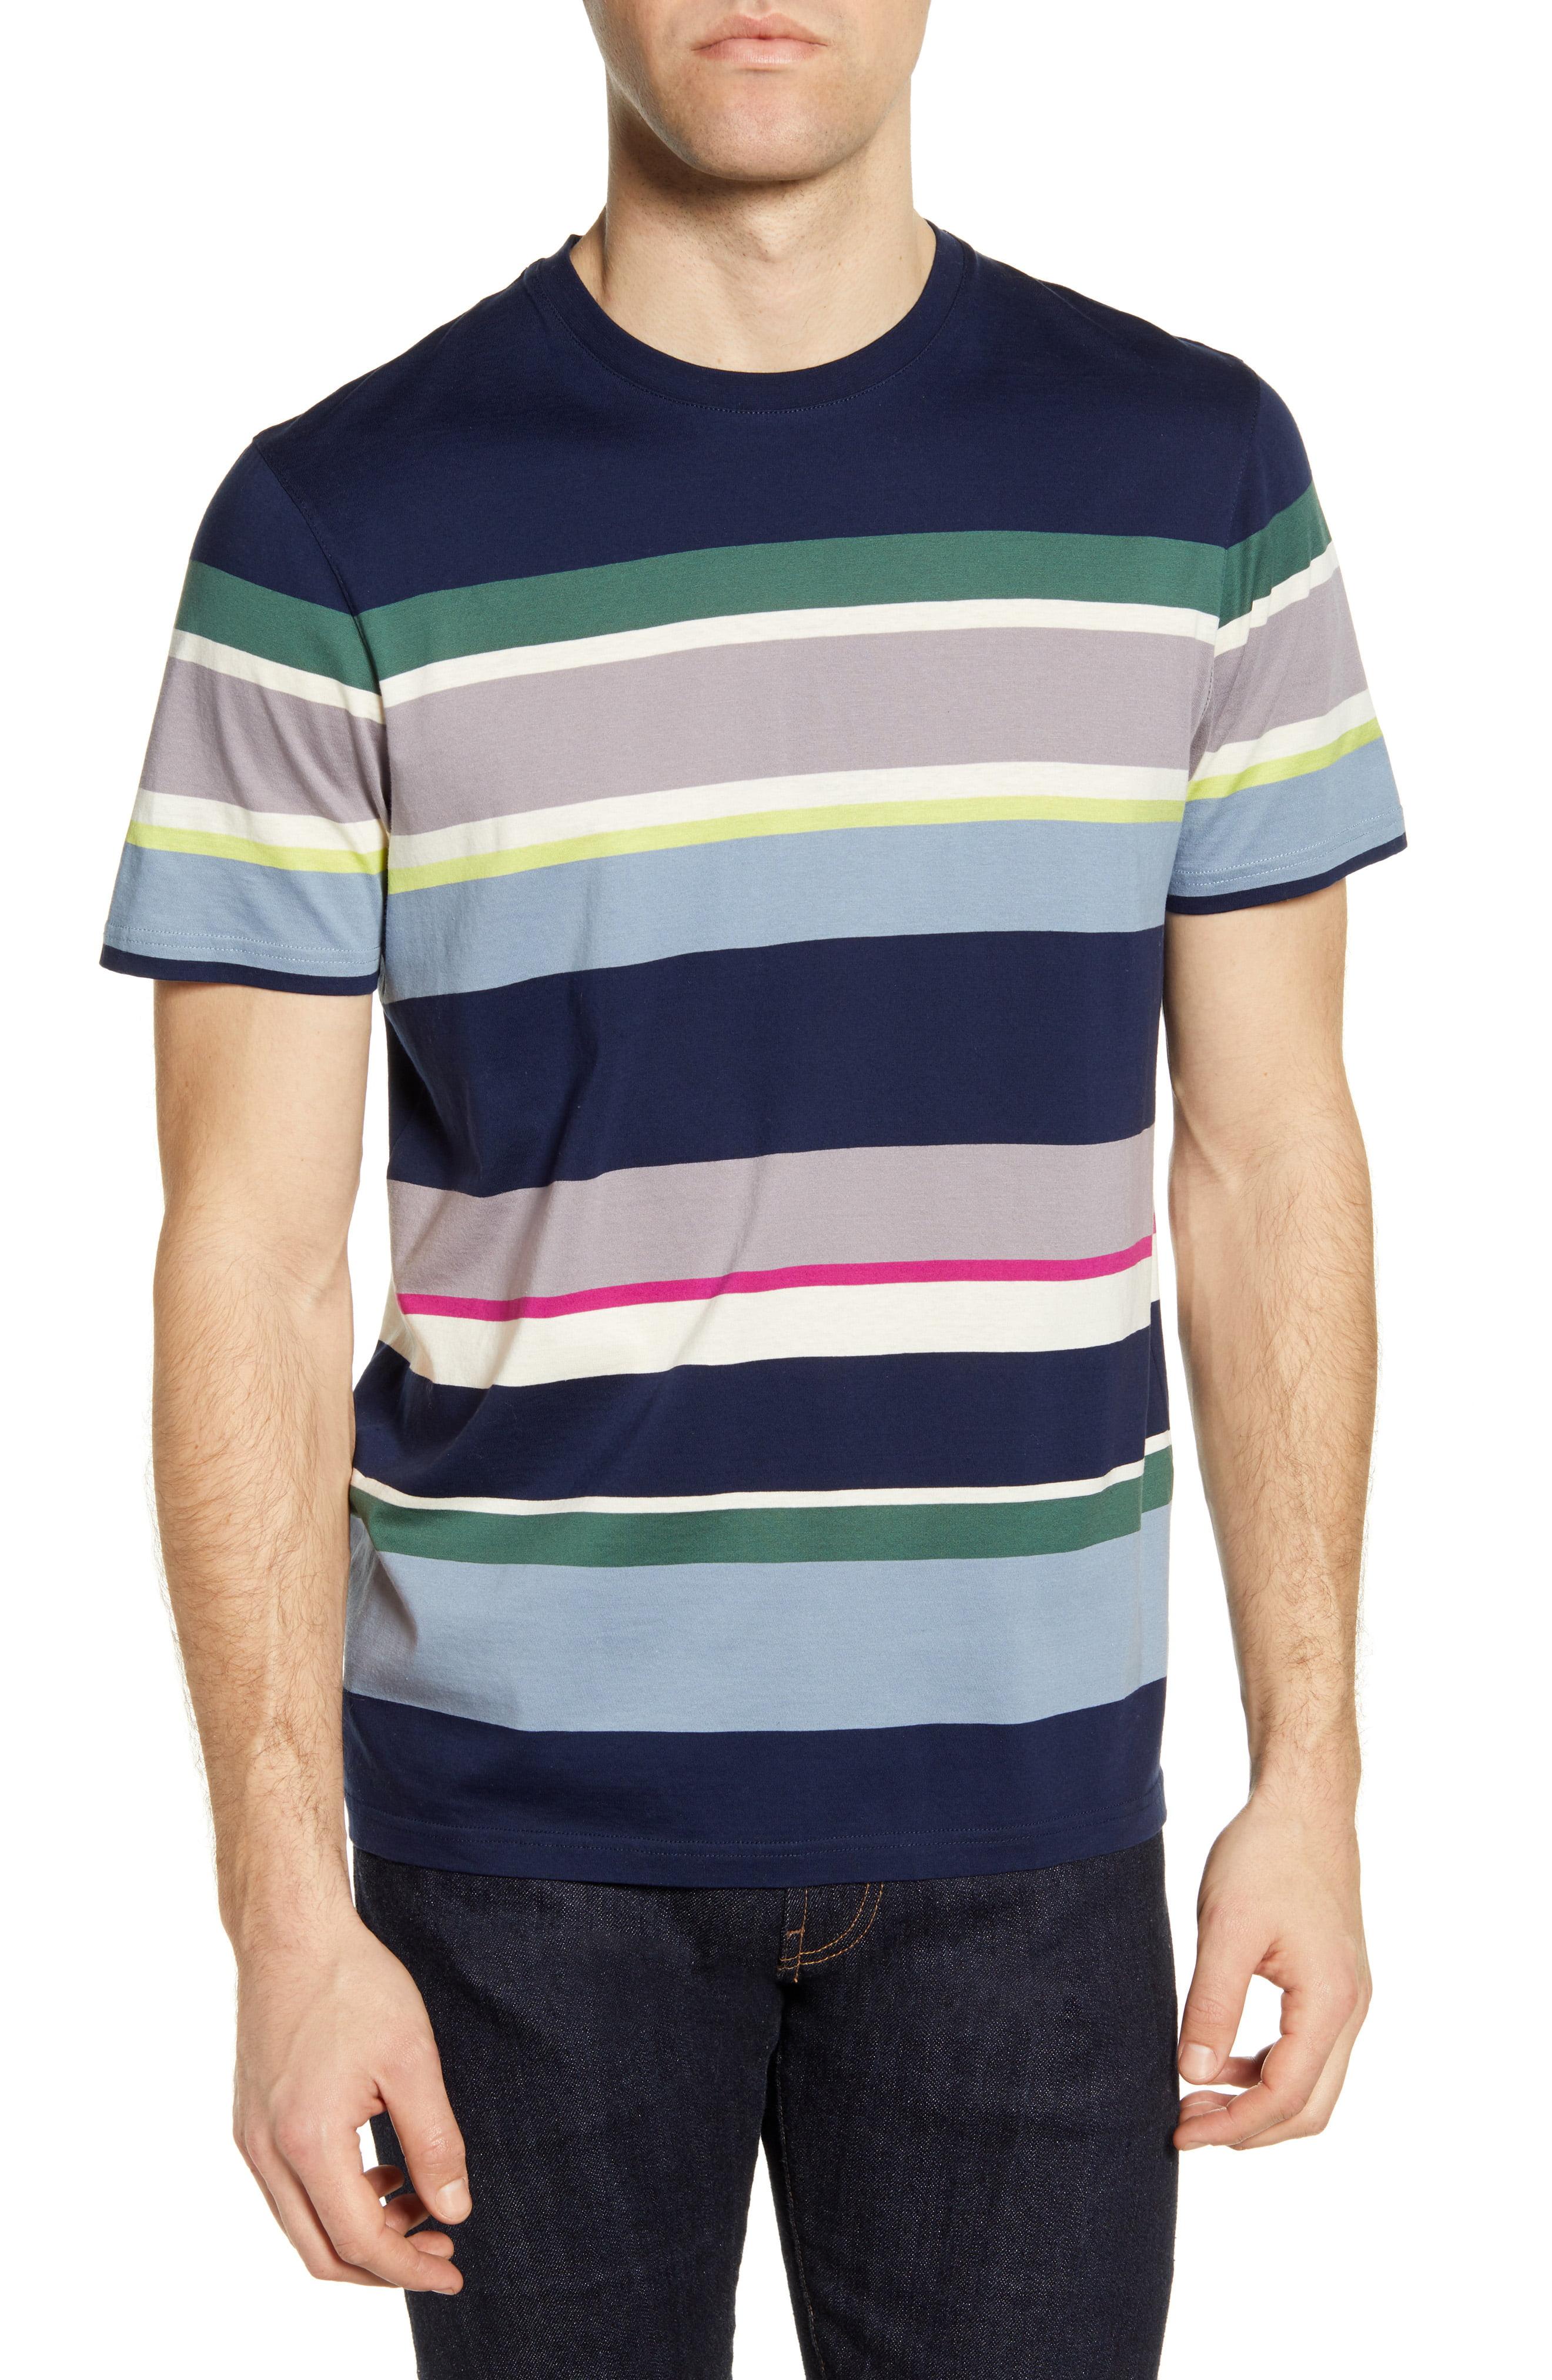 Ted Baker Cotton Mixed Stripe T-shirt in Navy (Blue) for Men - Lyst